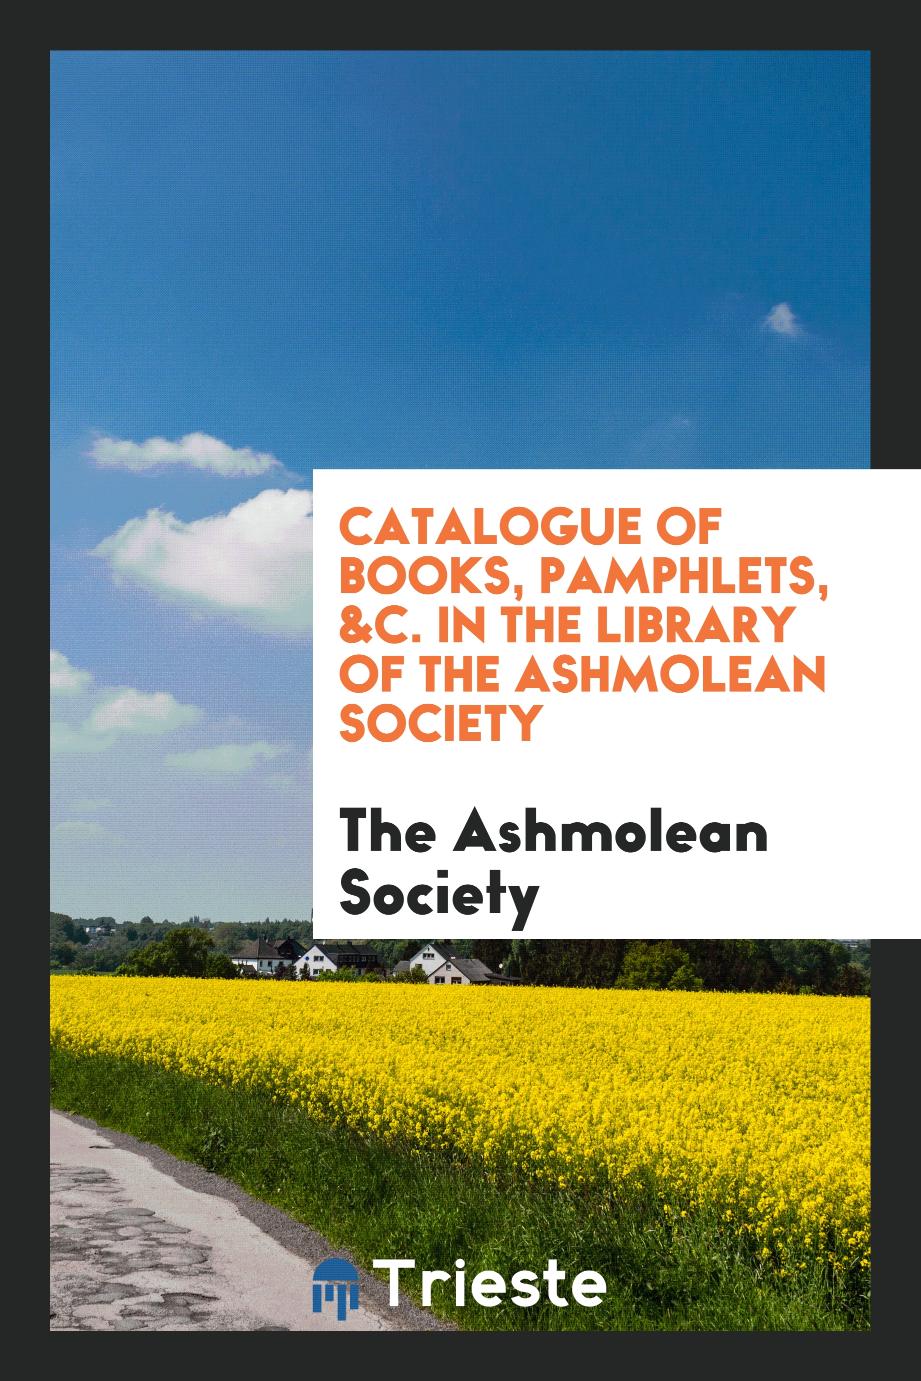 Catalogue of books, pamphlets, &c. in the Library of the Ashmolean society